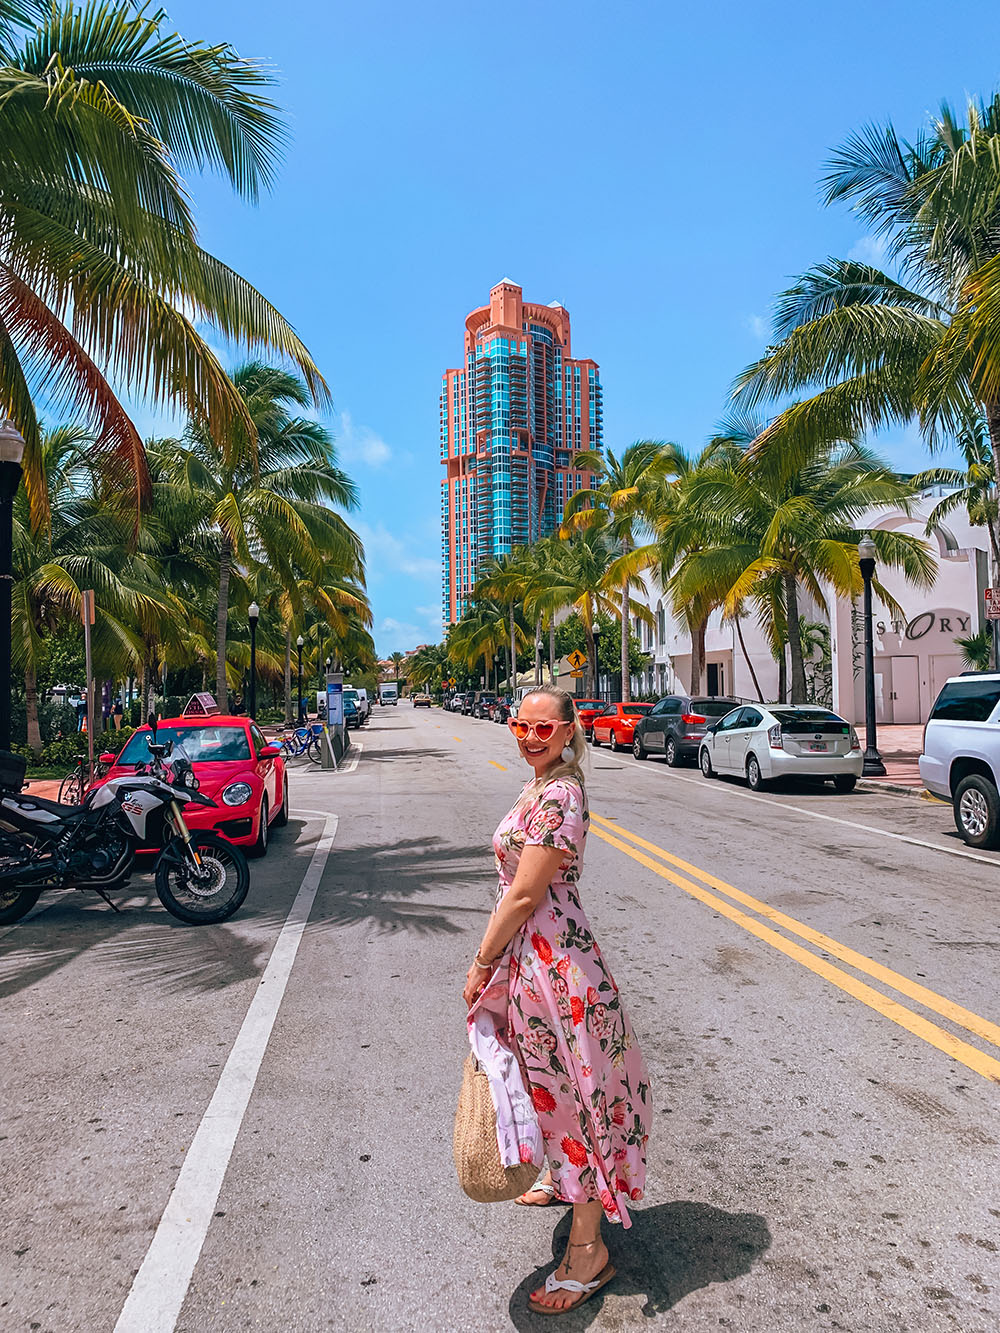 So you've planned a wonderful 3 day trip to Miami and now you're looking for the perfect itinerary for your visit… well, this guide is for you! I’ve put together the ultimate 3 days in Miami itinerary that will have you seeing and experiencing all of Miami’s top sights and attractions. From South Beach & Ocean Drive to Little Havana & Wynwood, you don’t want to miss this guide to the perfect long weekend in Miami. Pictured here: Stroll around Ocean Drive